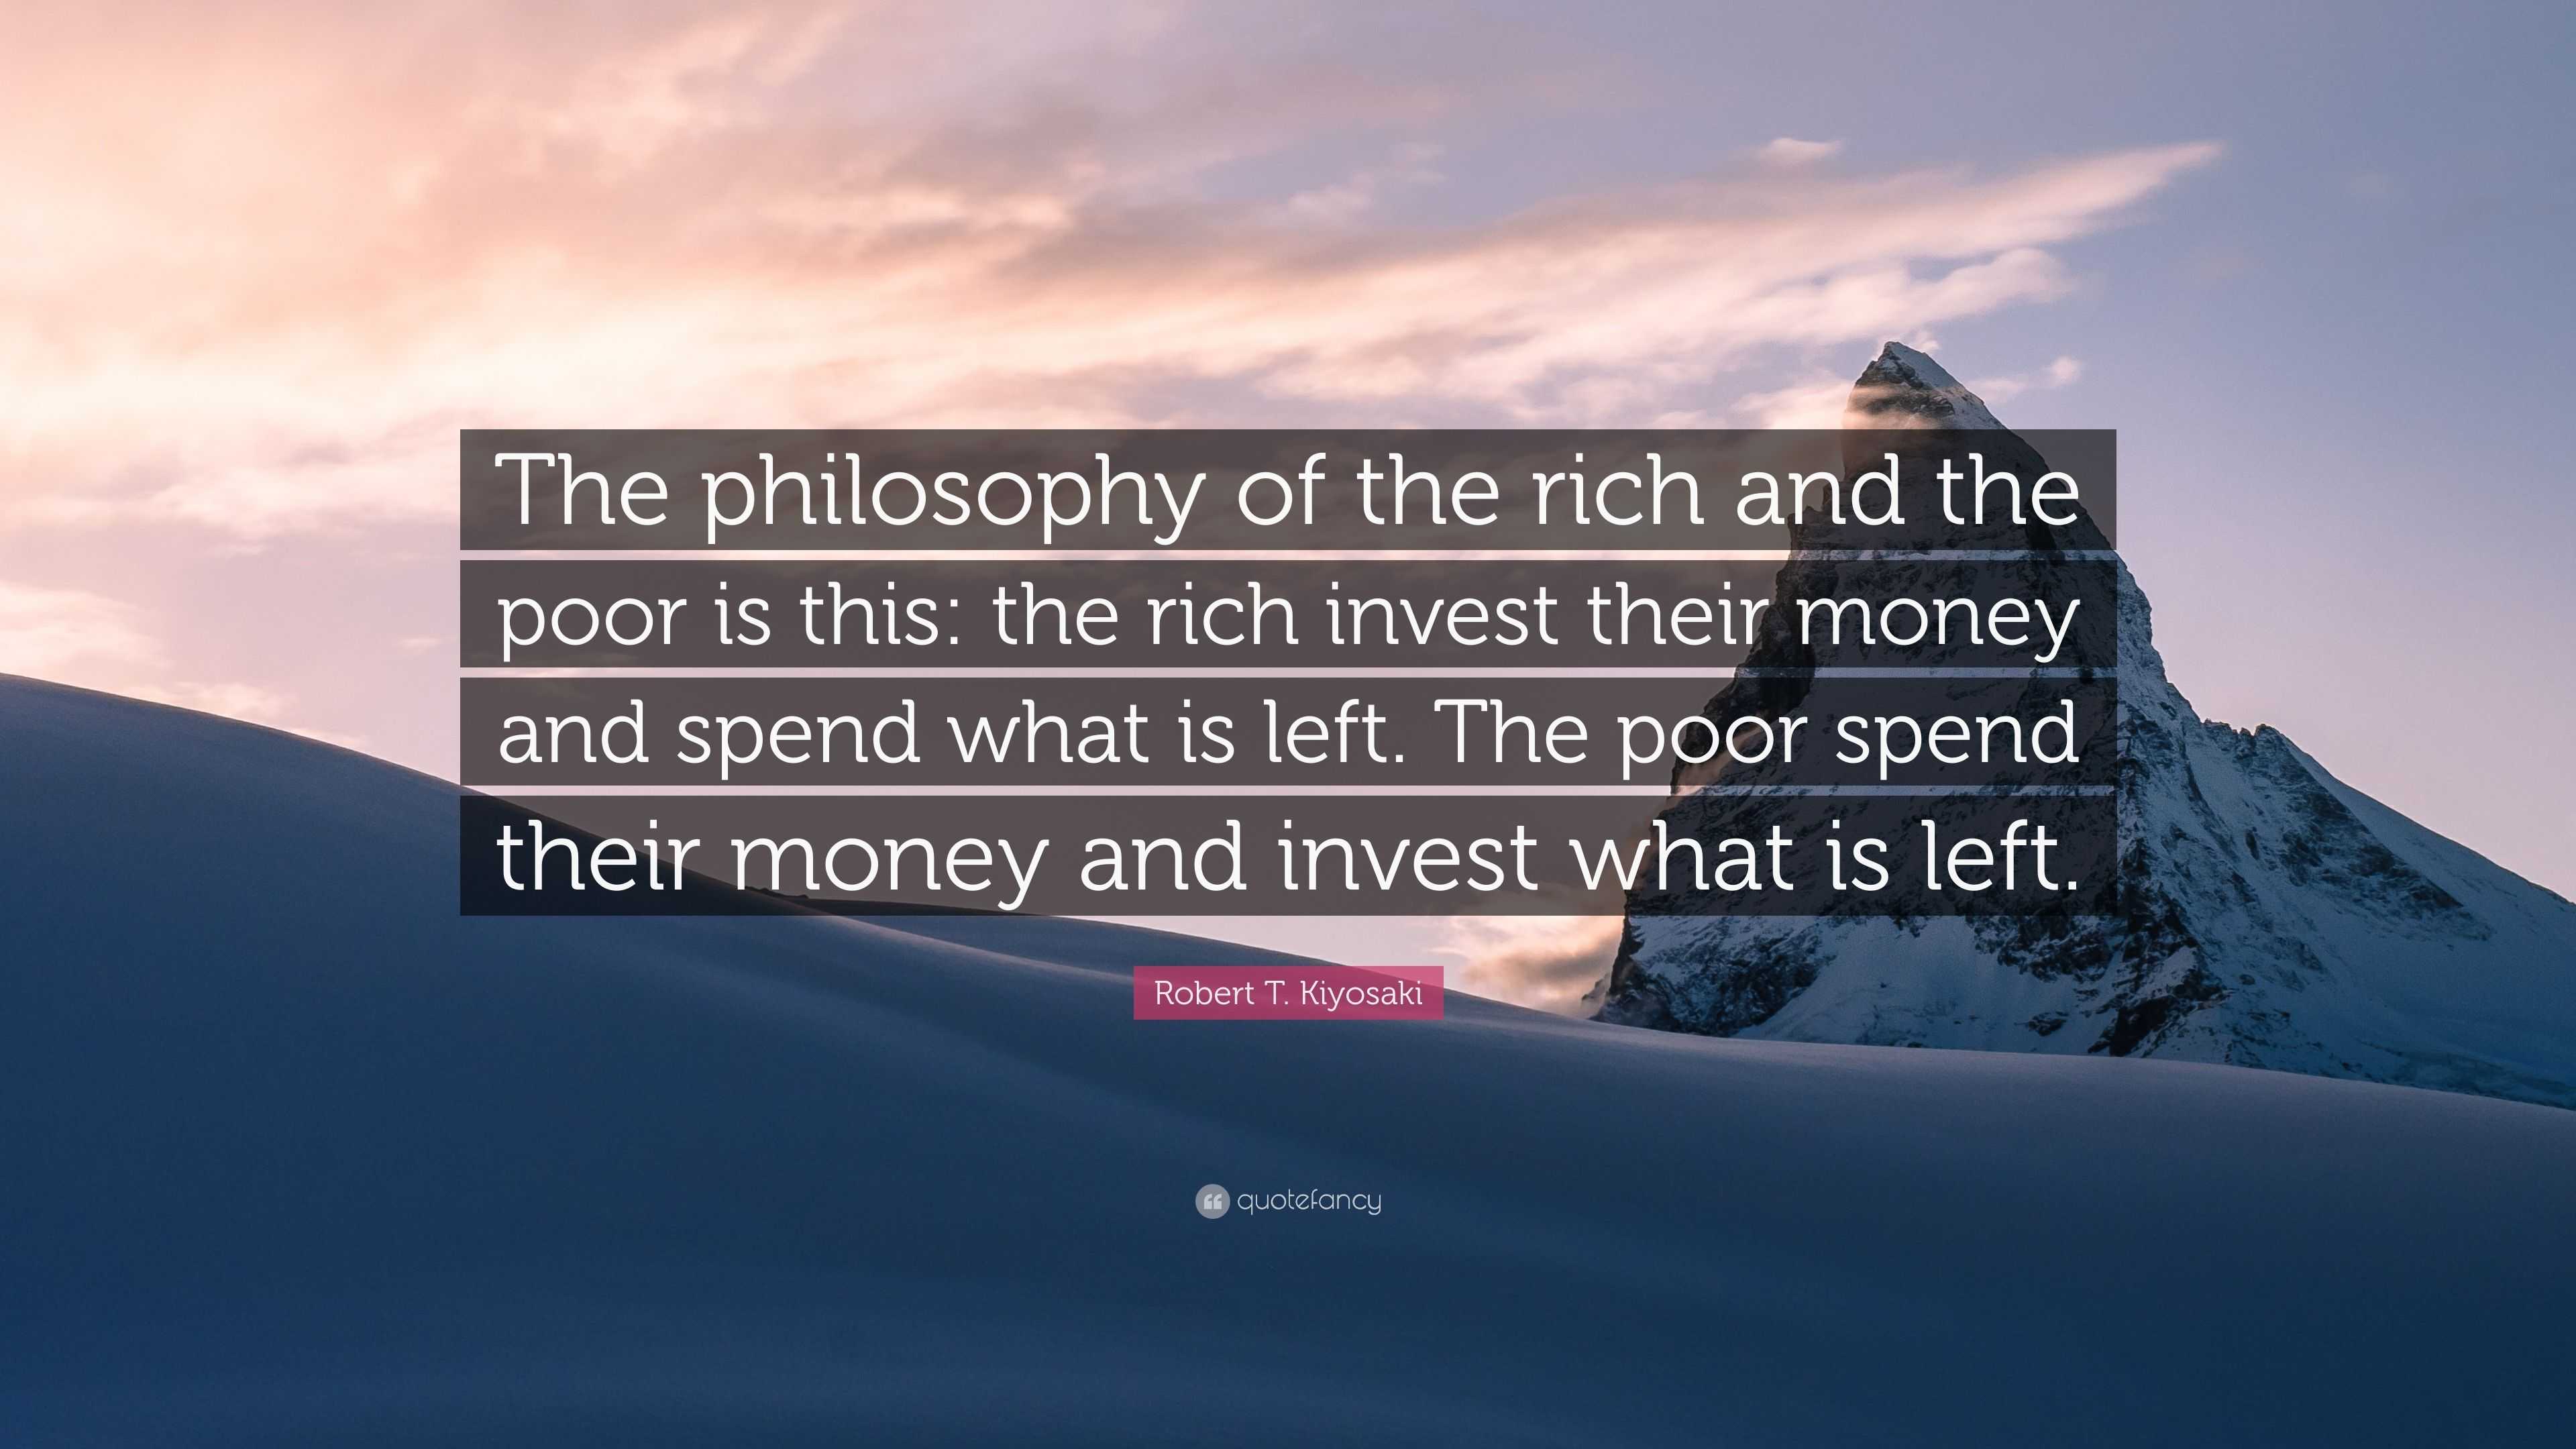 Robert T. Kiyosaki Quote: “The philosophy of the rich and the poor is